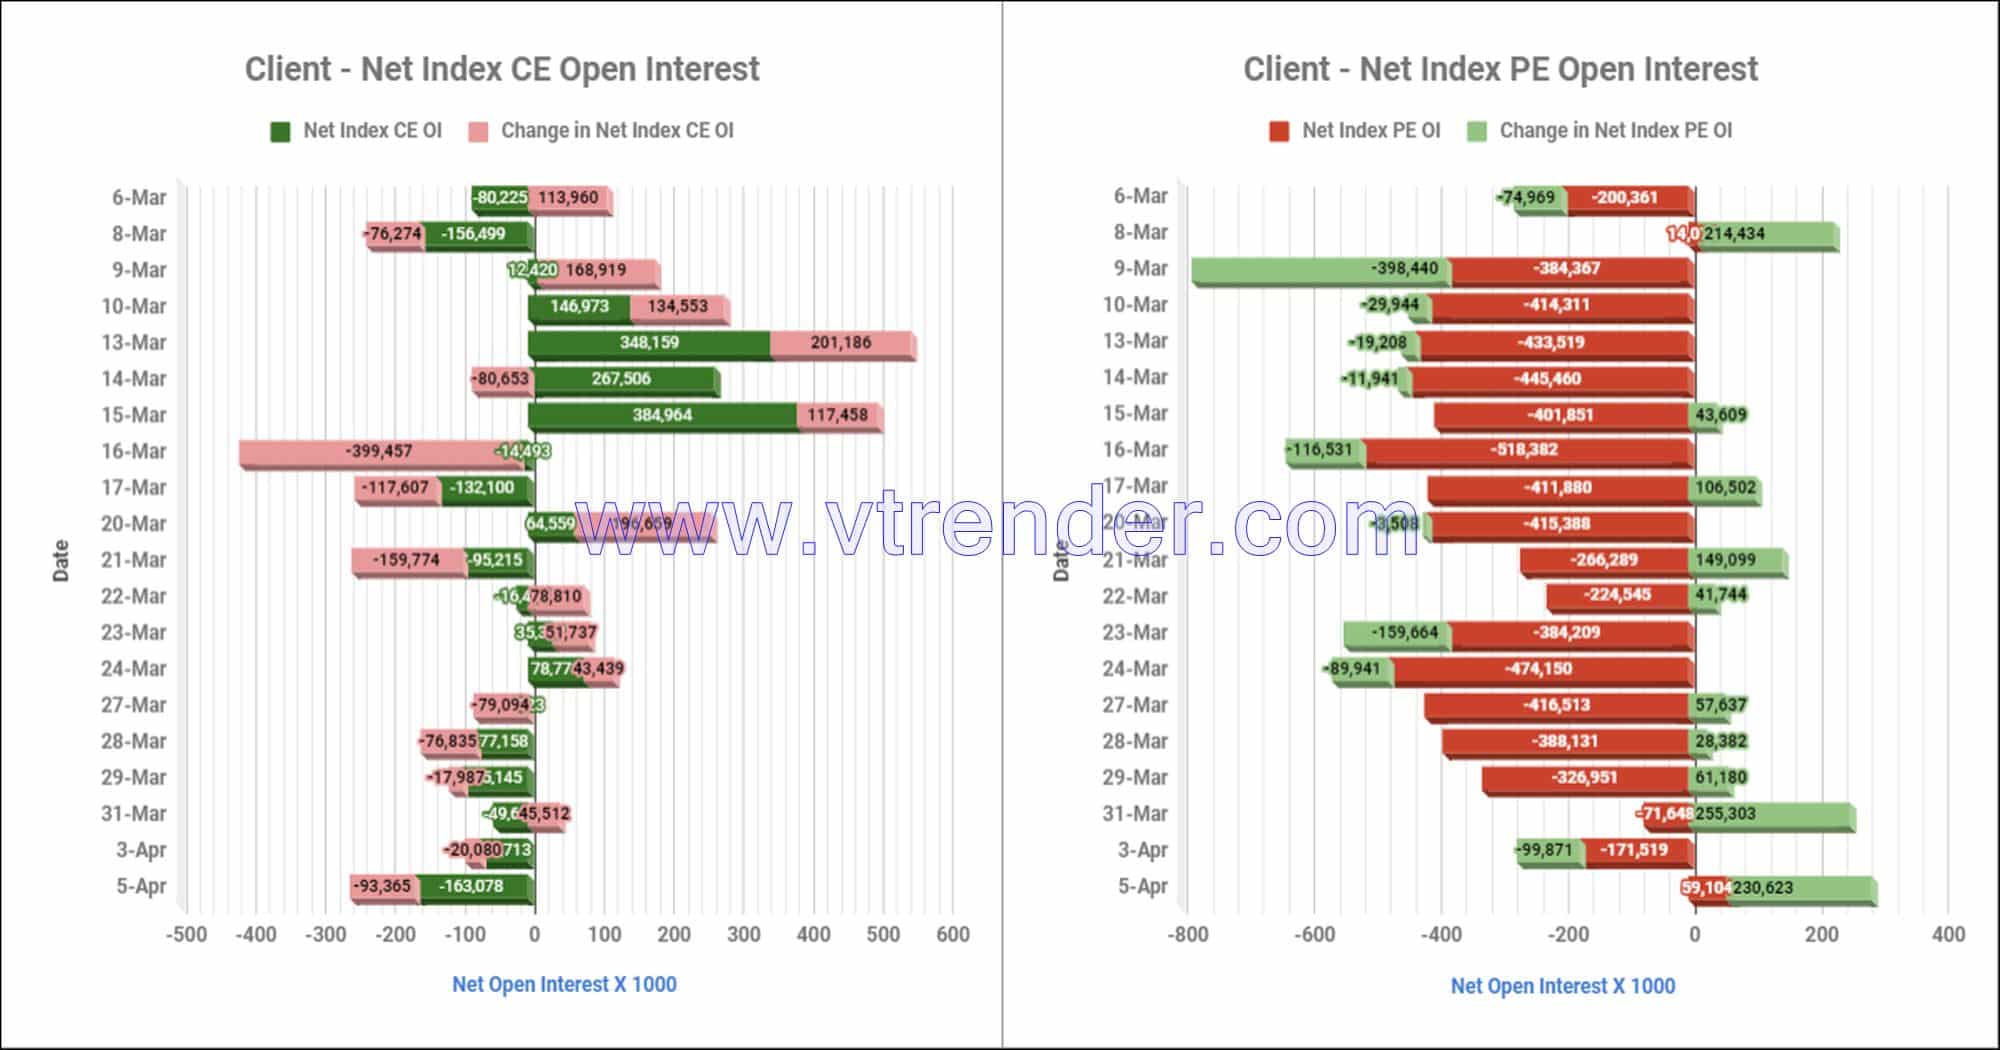 Clientinop05Apr Participantwise Net Open Interest And Net Equity Investments – 5Th Apr 2023 Client, Equity, Fii, Index Futures, Index Options, Open Interest, Prop